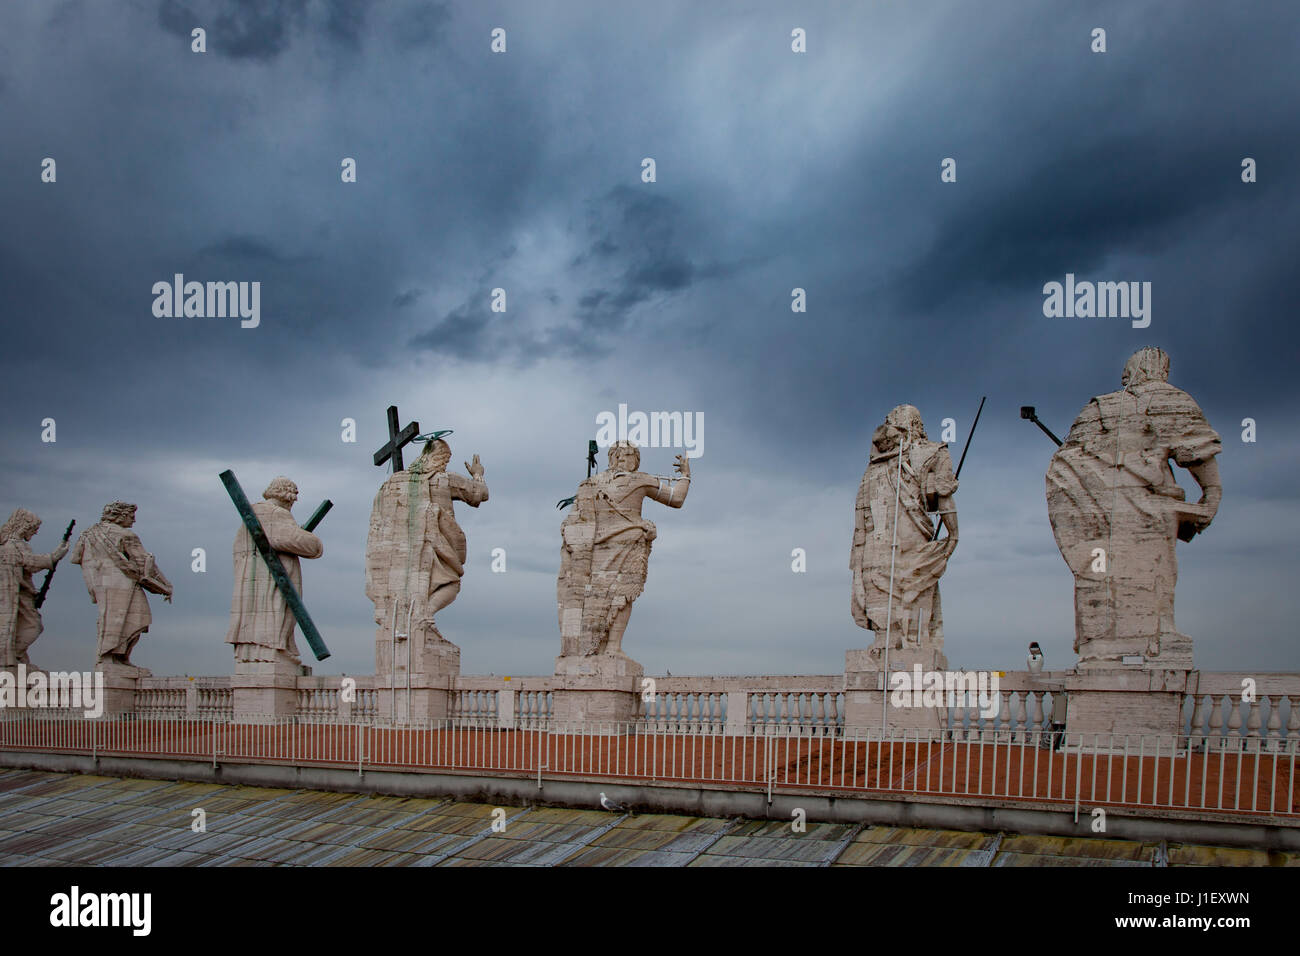 Stormy skies over the statues along the roof-line of Saint Peters Basilica, Vatican, Rome, Italy Stock Photo